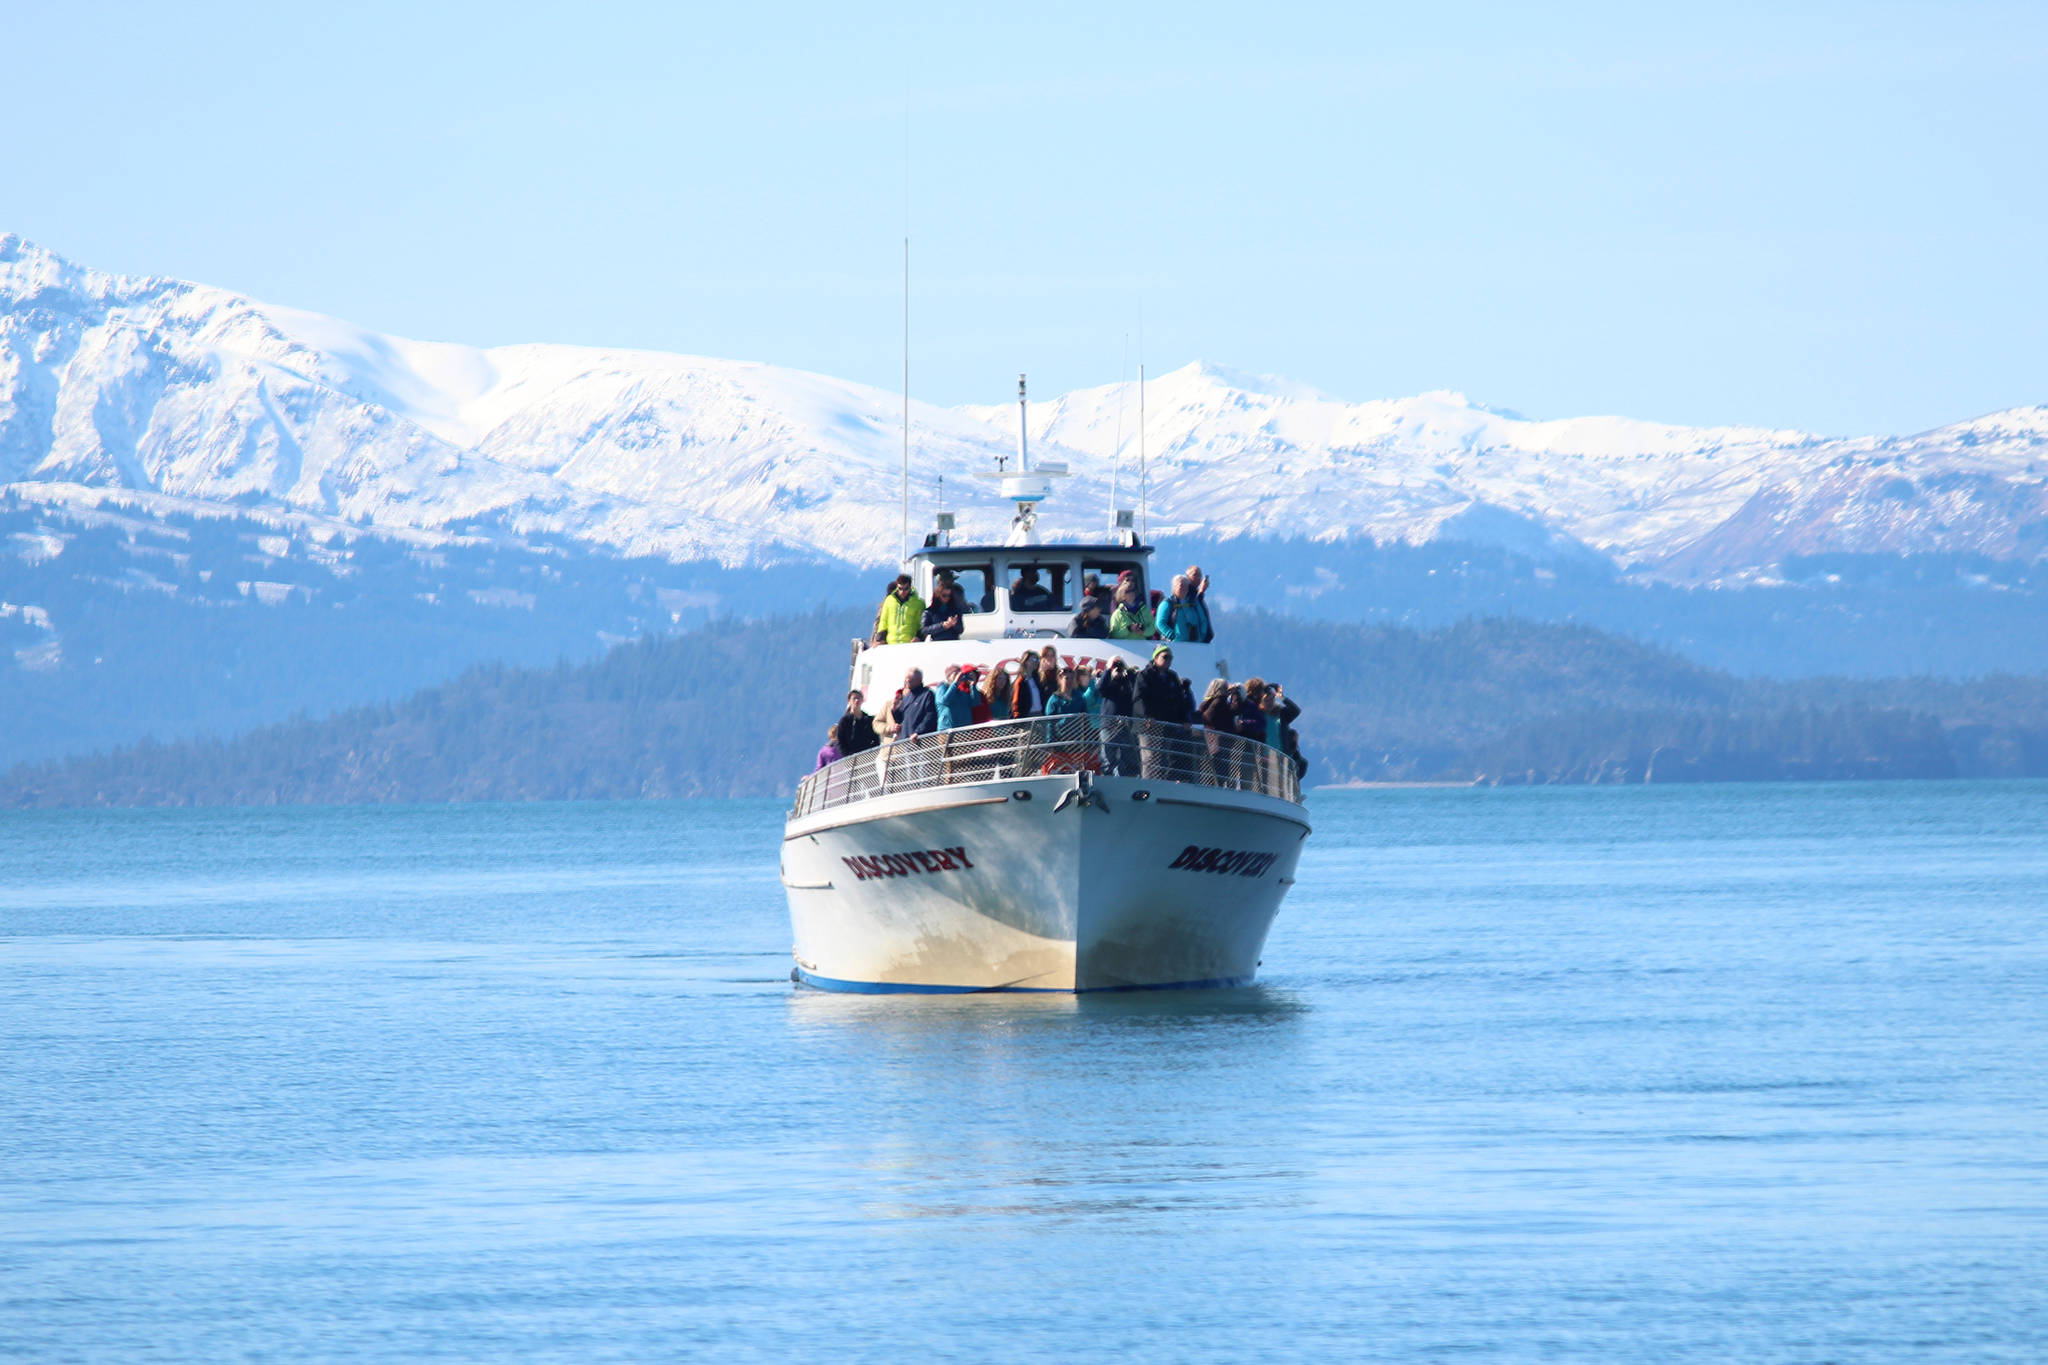 Residents of the Homer area peer off the bow of the Discovery during a tour of oil spill response training hosted by the Prince William Sound Regional Citizens’ Advisory Council in conjunction with Alyeska Pipeline, Alaska Coastal Marine and the Center for Alaskan Coastal Studies, on Saturday, April 14, 2018 in Homer, Alaska. Residents aboard two boats were taken across Kachemak Bay for an up close look at how fishing vessels train annually for the event of an oil spill. (Photo by Megan Pacer/Homer News)